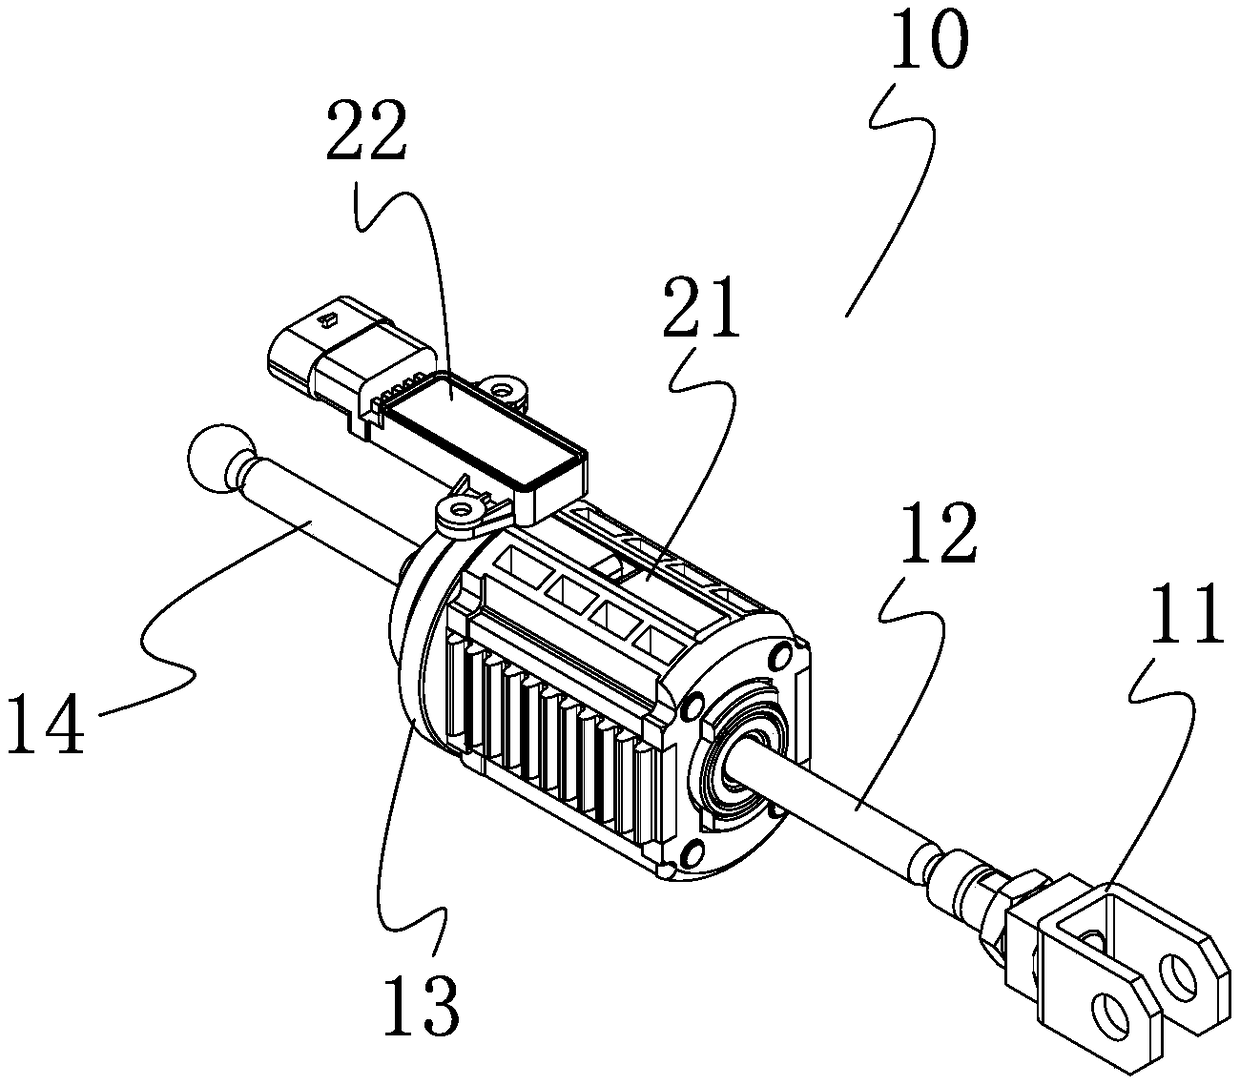 Transmission mechanism and electronic auxiliary braking system